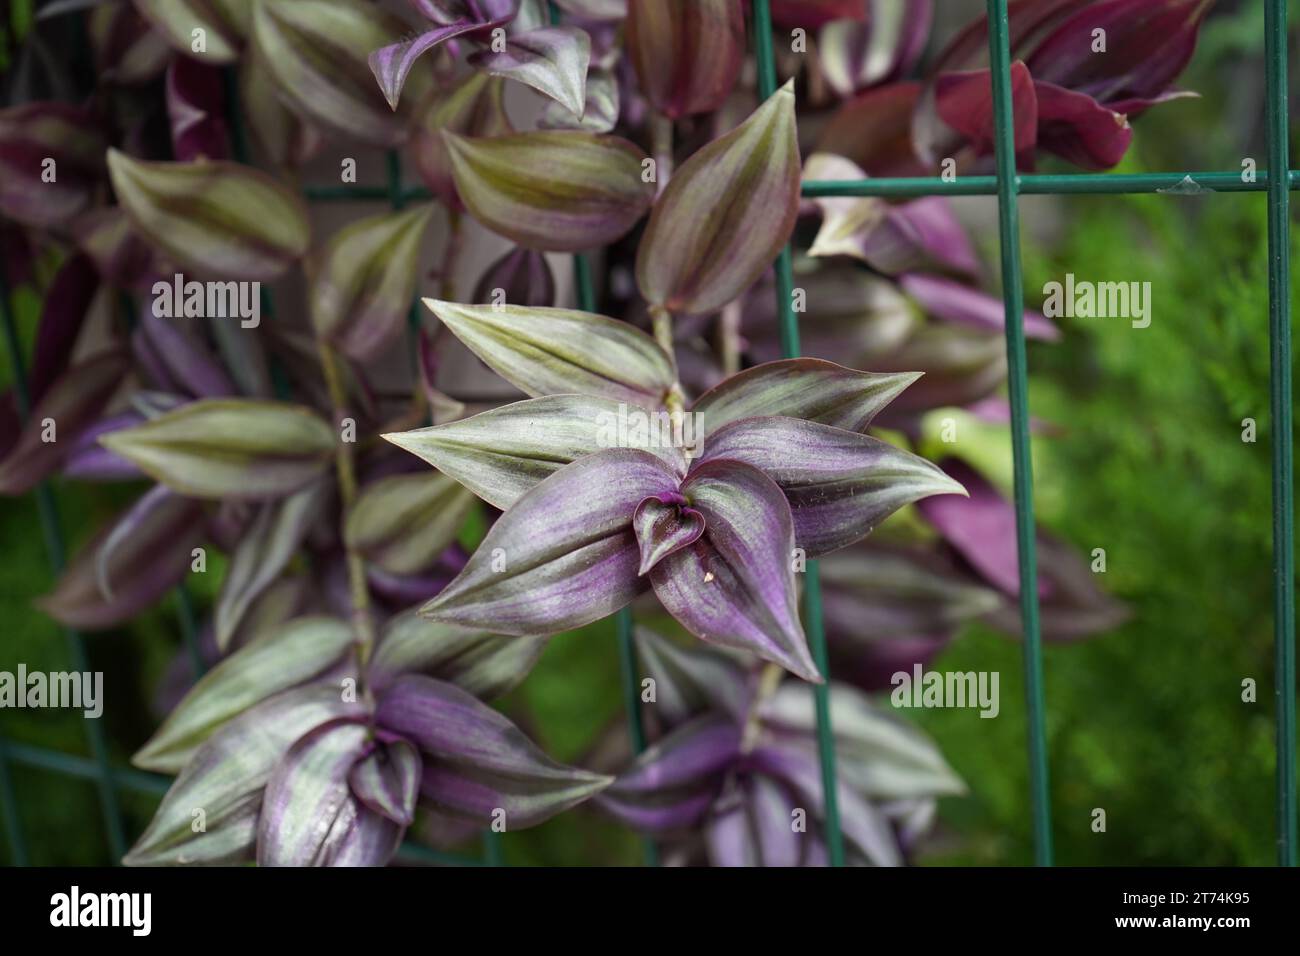 Silver inch plant or Wandering Jew(Tradescantia zebrina), formerly known as (Zebrina pendula) Stock Photo